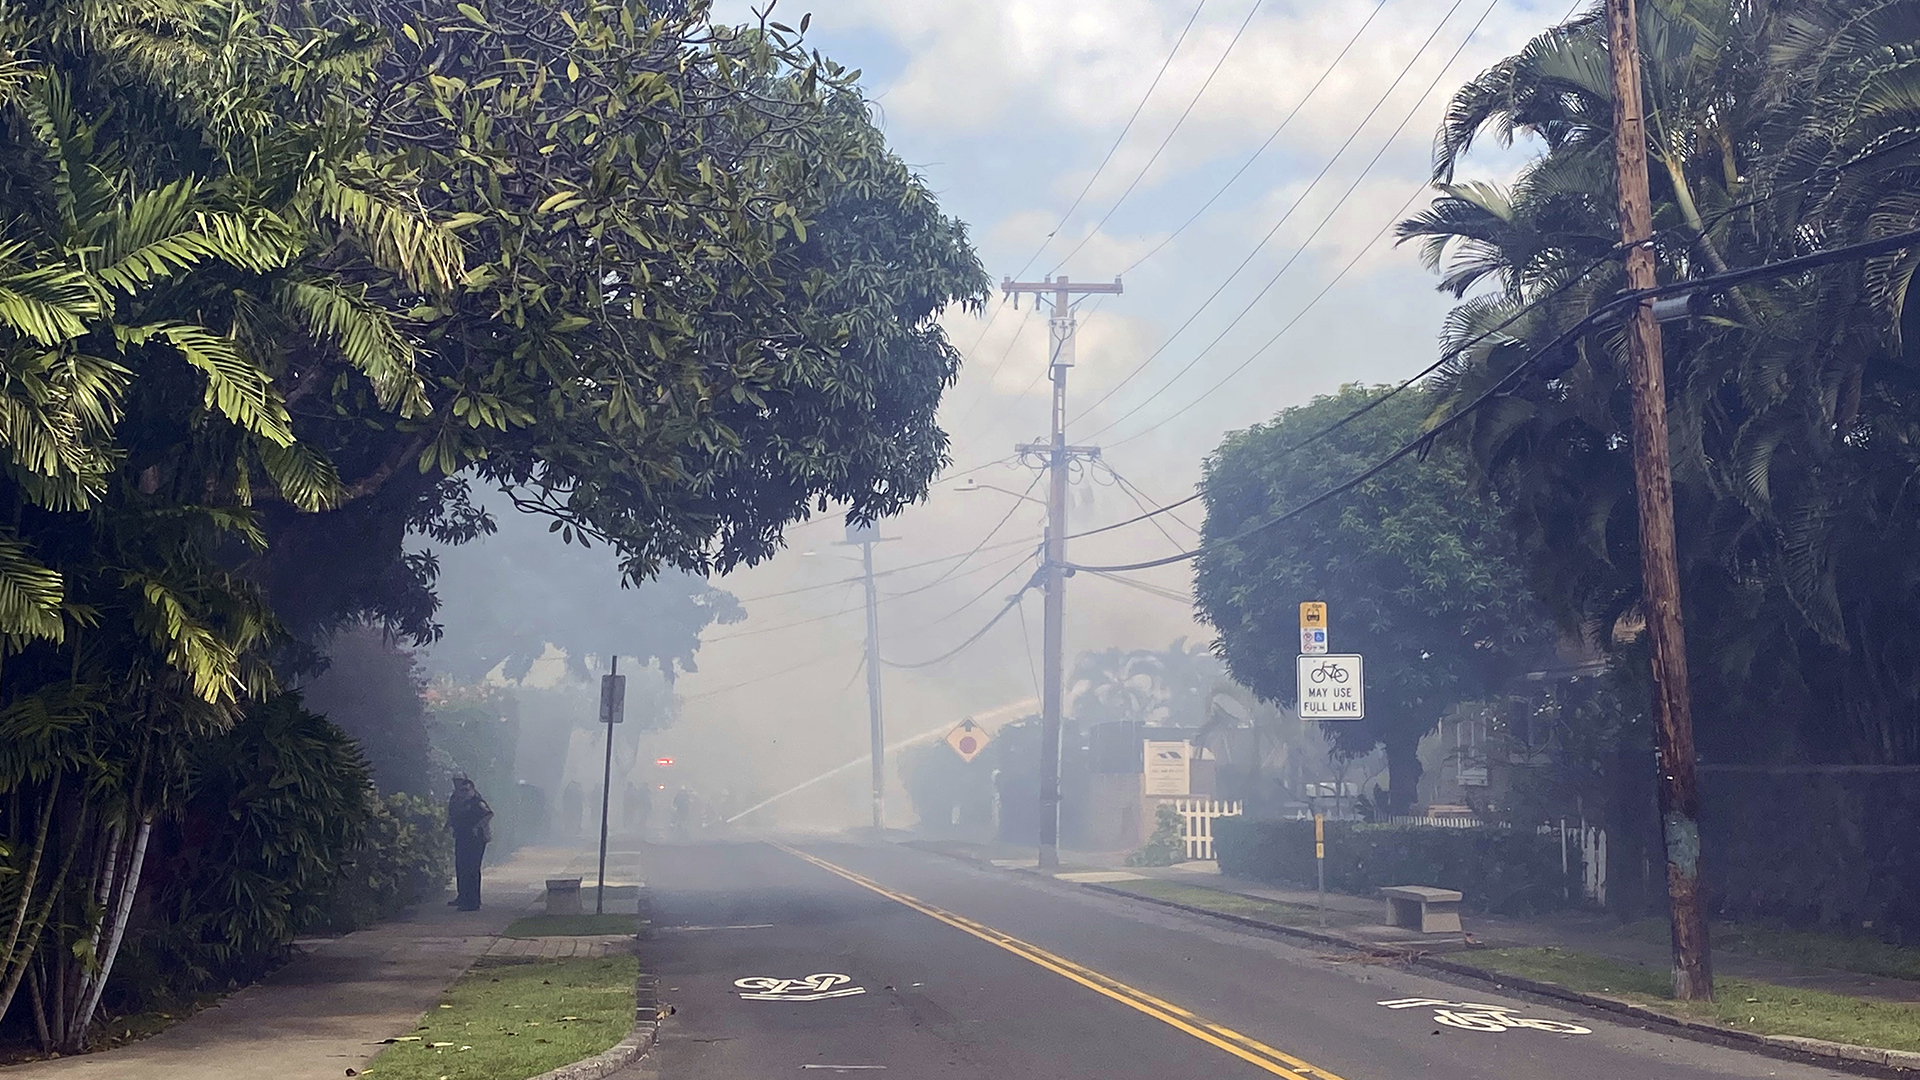 Two police killed in Hawaii shooting, multiple homes up in flames - CGTN1920 x 1080